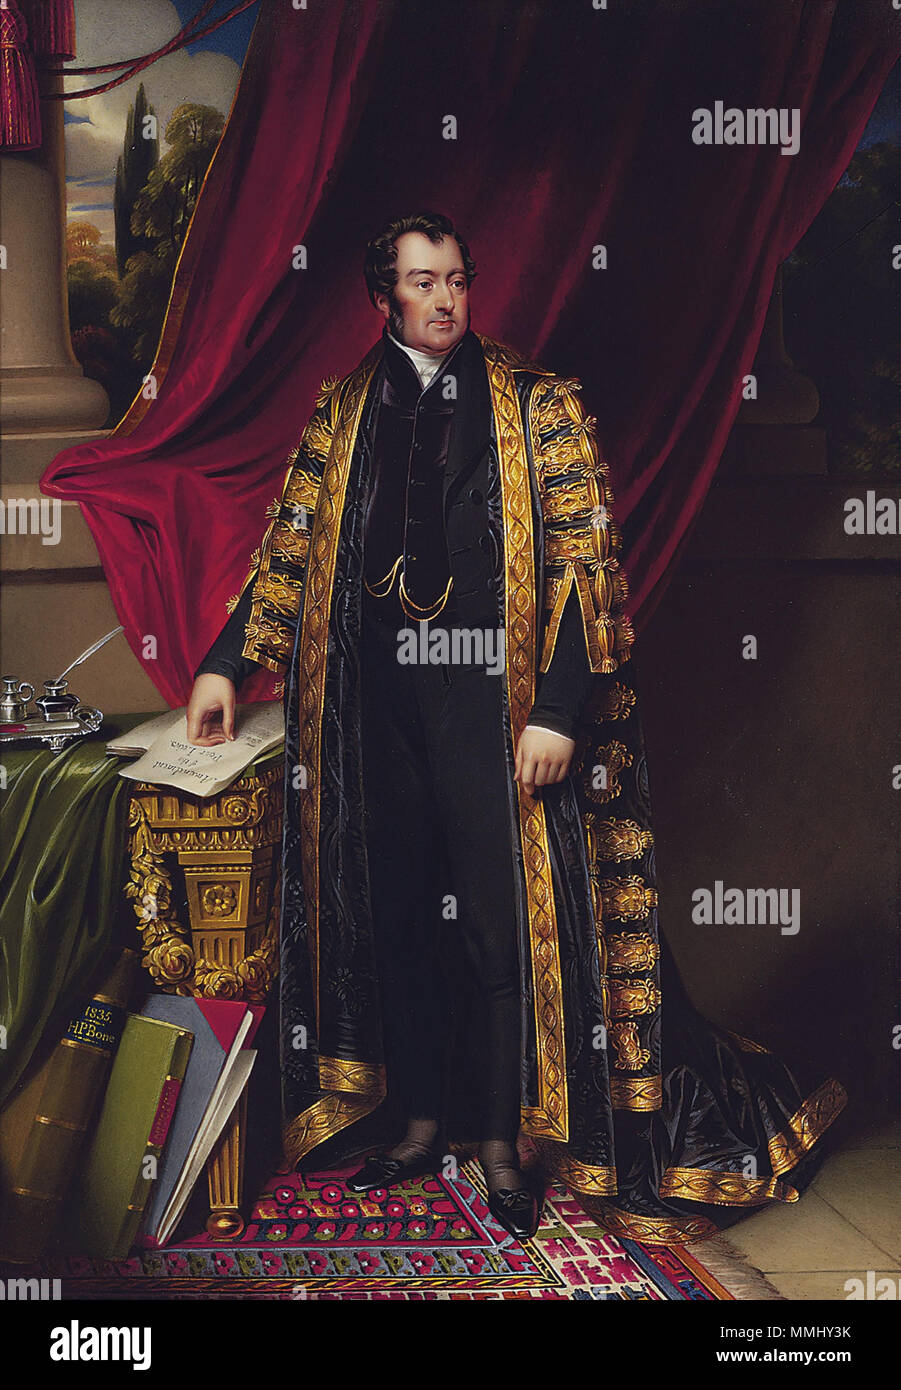 .  English: John Charles Spencer, Viscount Althorp, 3rd Earl Spencer (1782-1845), as Chancellor of the Exchequer, full length in Chancellor's robes over black mourning suit, standing beside a George II giltwood console table from Spencer House draped with green cloth, his right hand resting on a document entitled 'Amendment of the Poor Laws', large leather-bound books and folio propped against table leg, inkwell, salt cellar and quill on silver stand on table, red curtain, pillar and curtain interior; landscape background signed and dated on the spine of the largest leather-bound book '1835. H Stock Photo